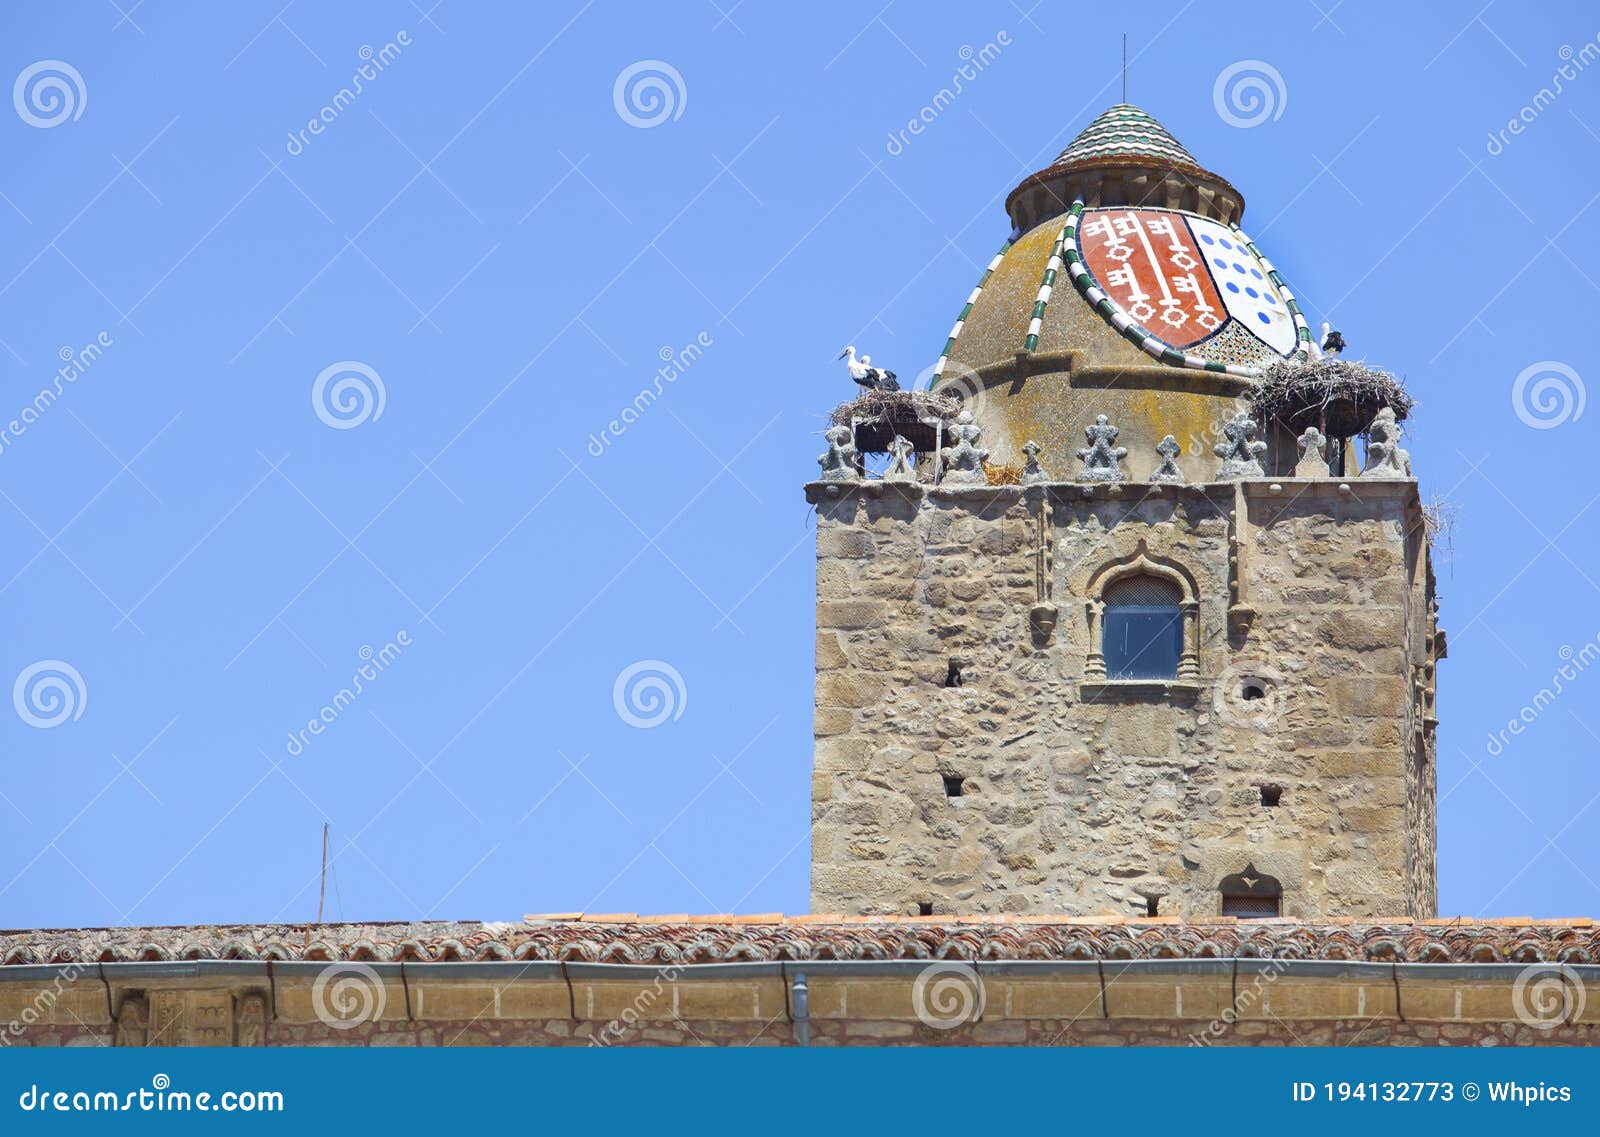 alfiler tower, gothic belfry adorned with glazed roof tiles, trujillo, spain